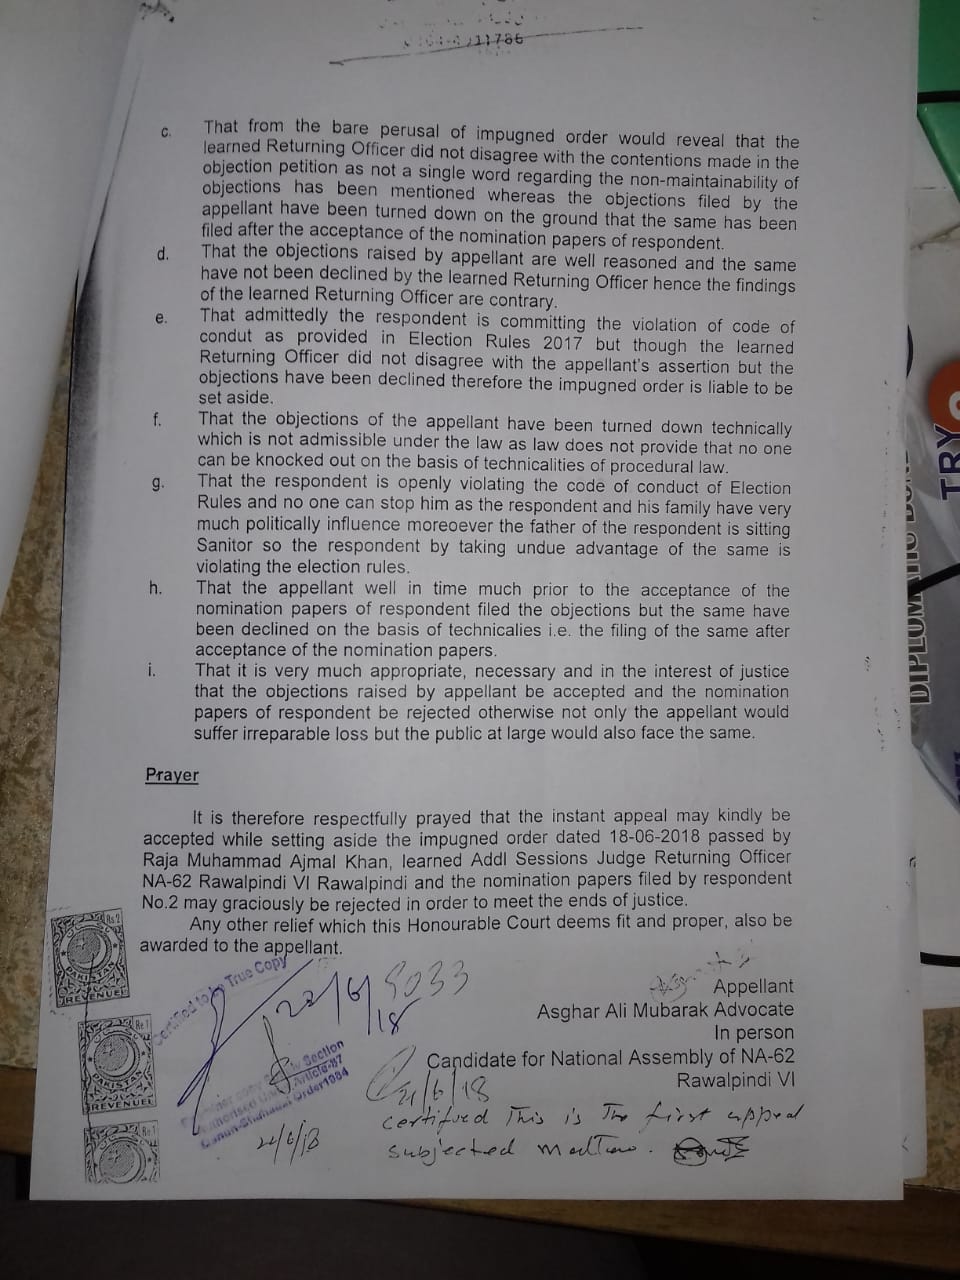 PAKISTAN, AWAMI, LEAGUE, CANDIDATE, ASGHAR ALI MUBARAK, CASE, AGAINST, BARRISTER, DANIYAL CHAUDHRY, AND, OTHERS, DETAILED, JUDGEMENT, DECLARED, BY, JUSTICE IBAD UR RAHMAN LODHI